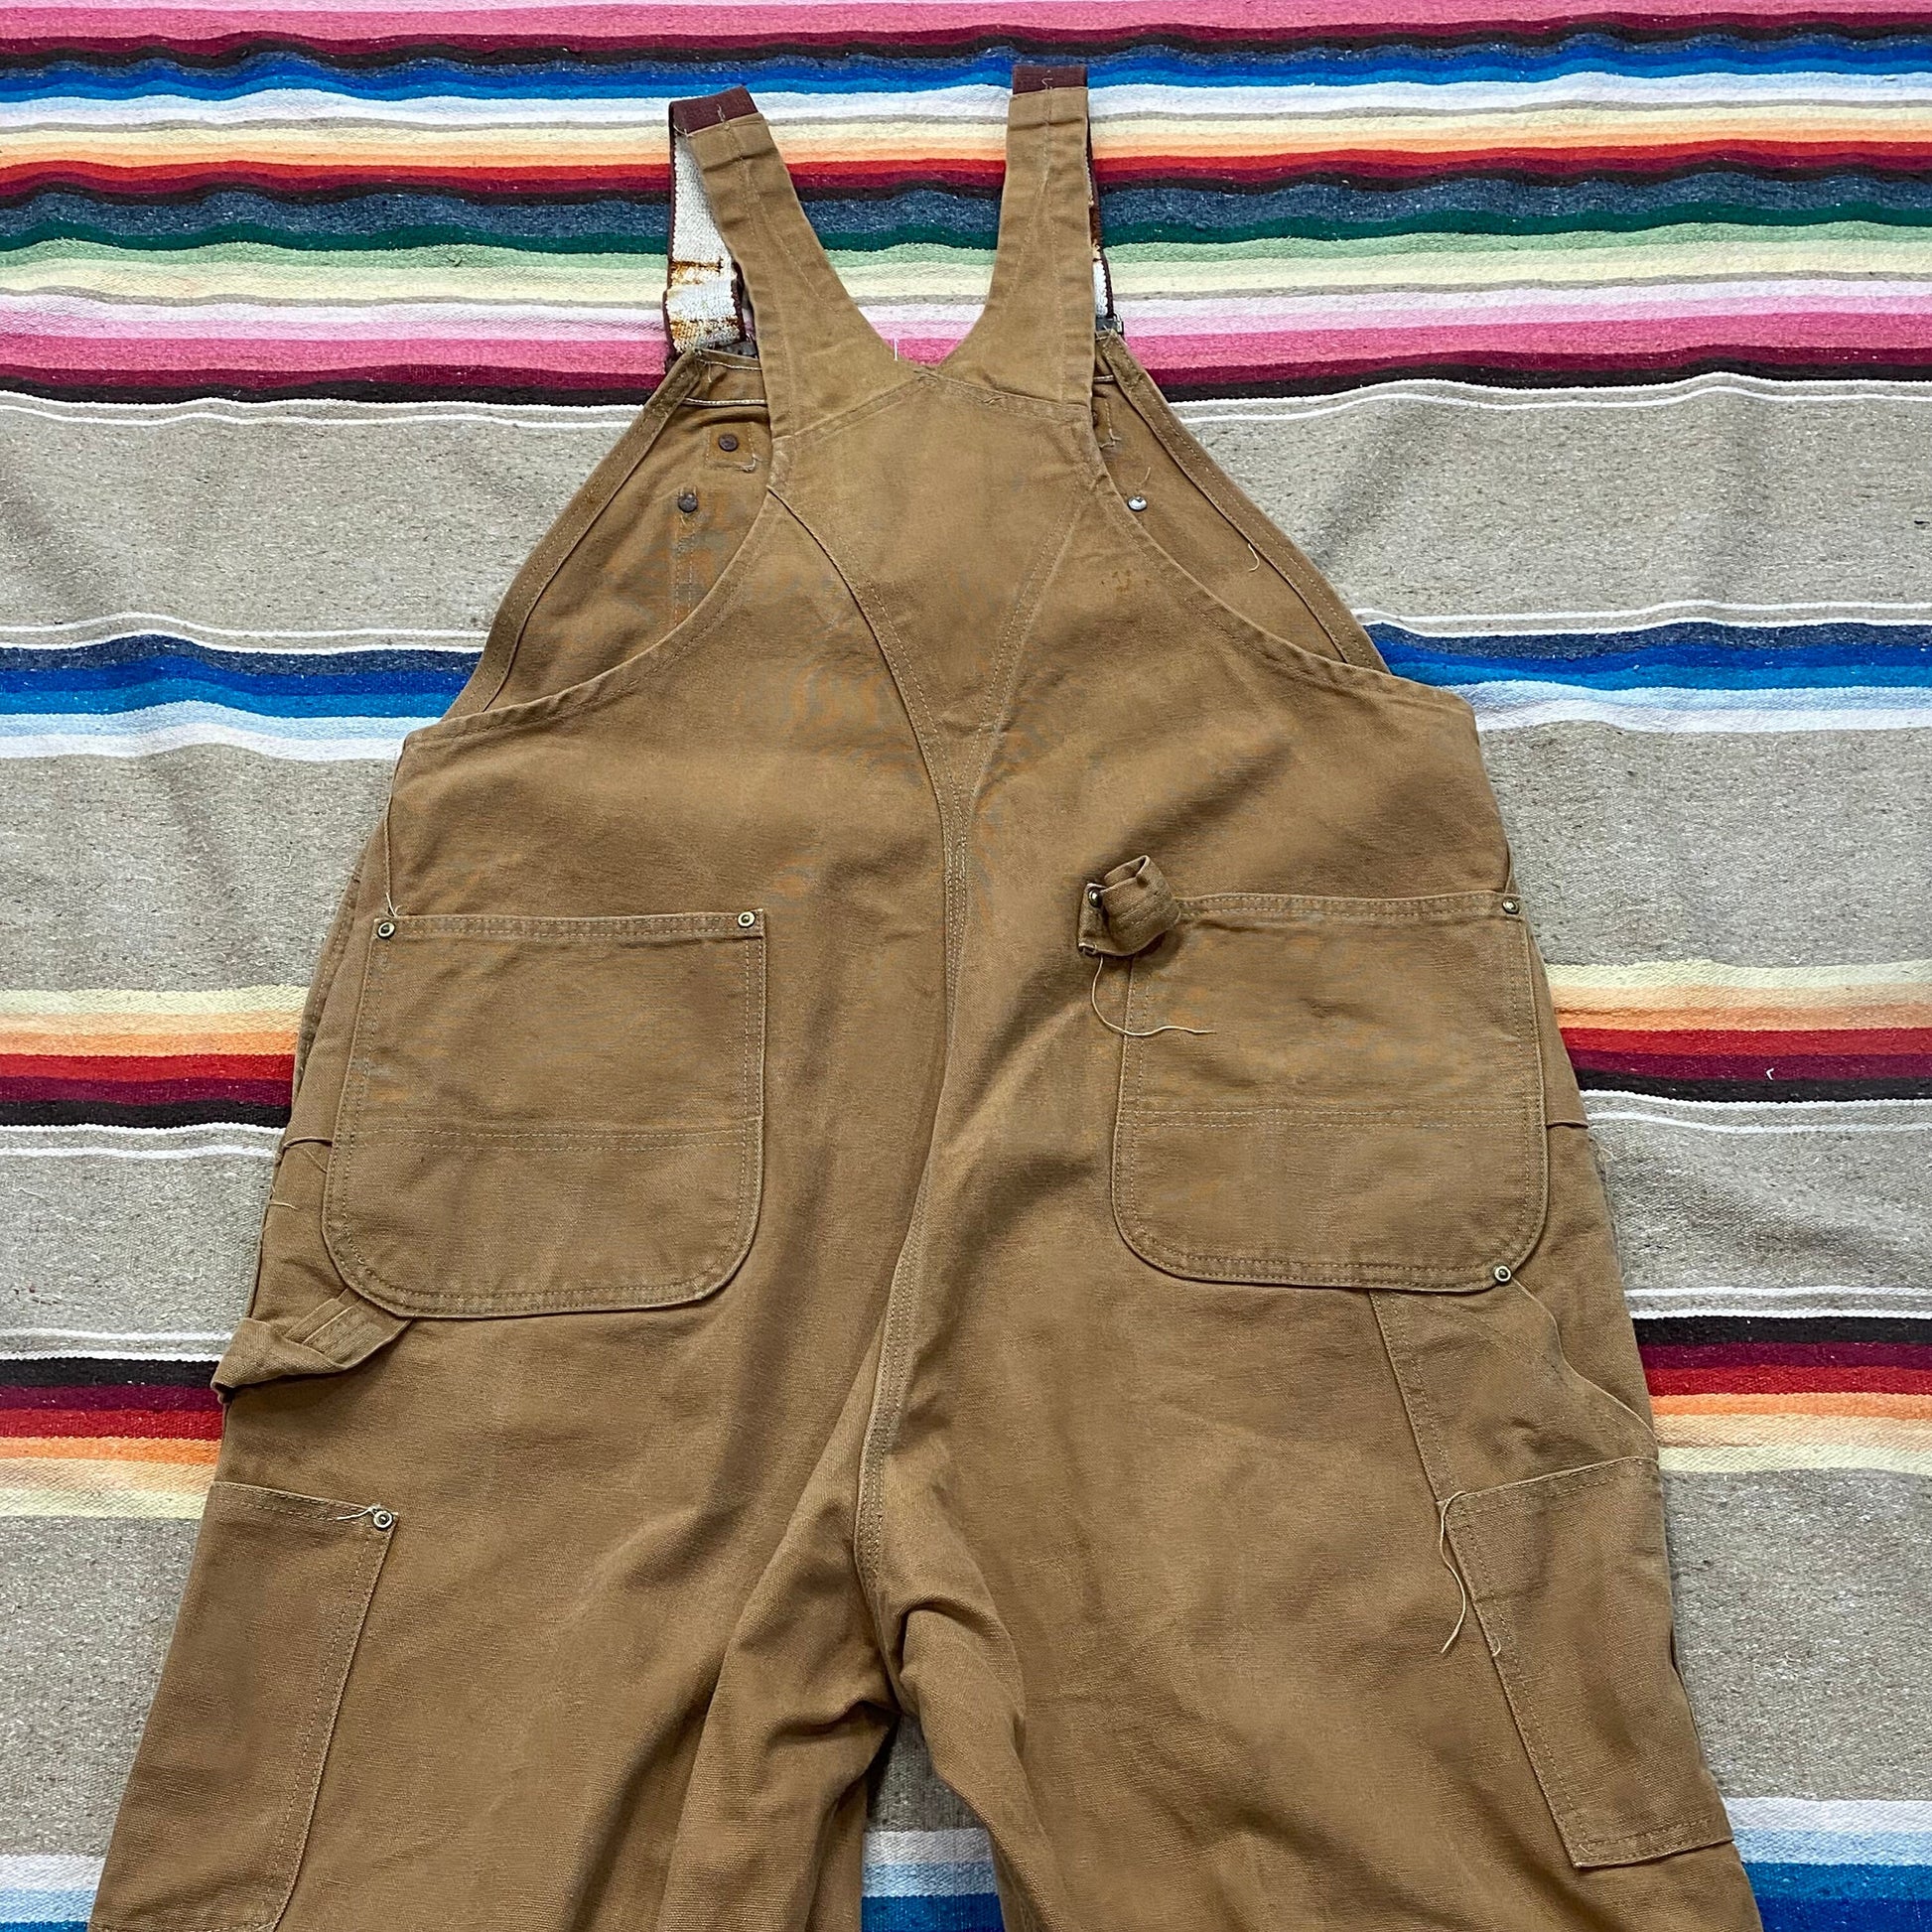 1980s 1983 Carhartt Double Knee Overalls Made in USA Size 40x28.5